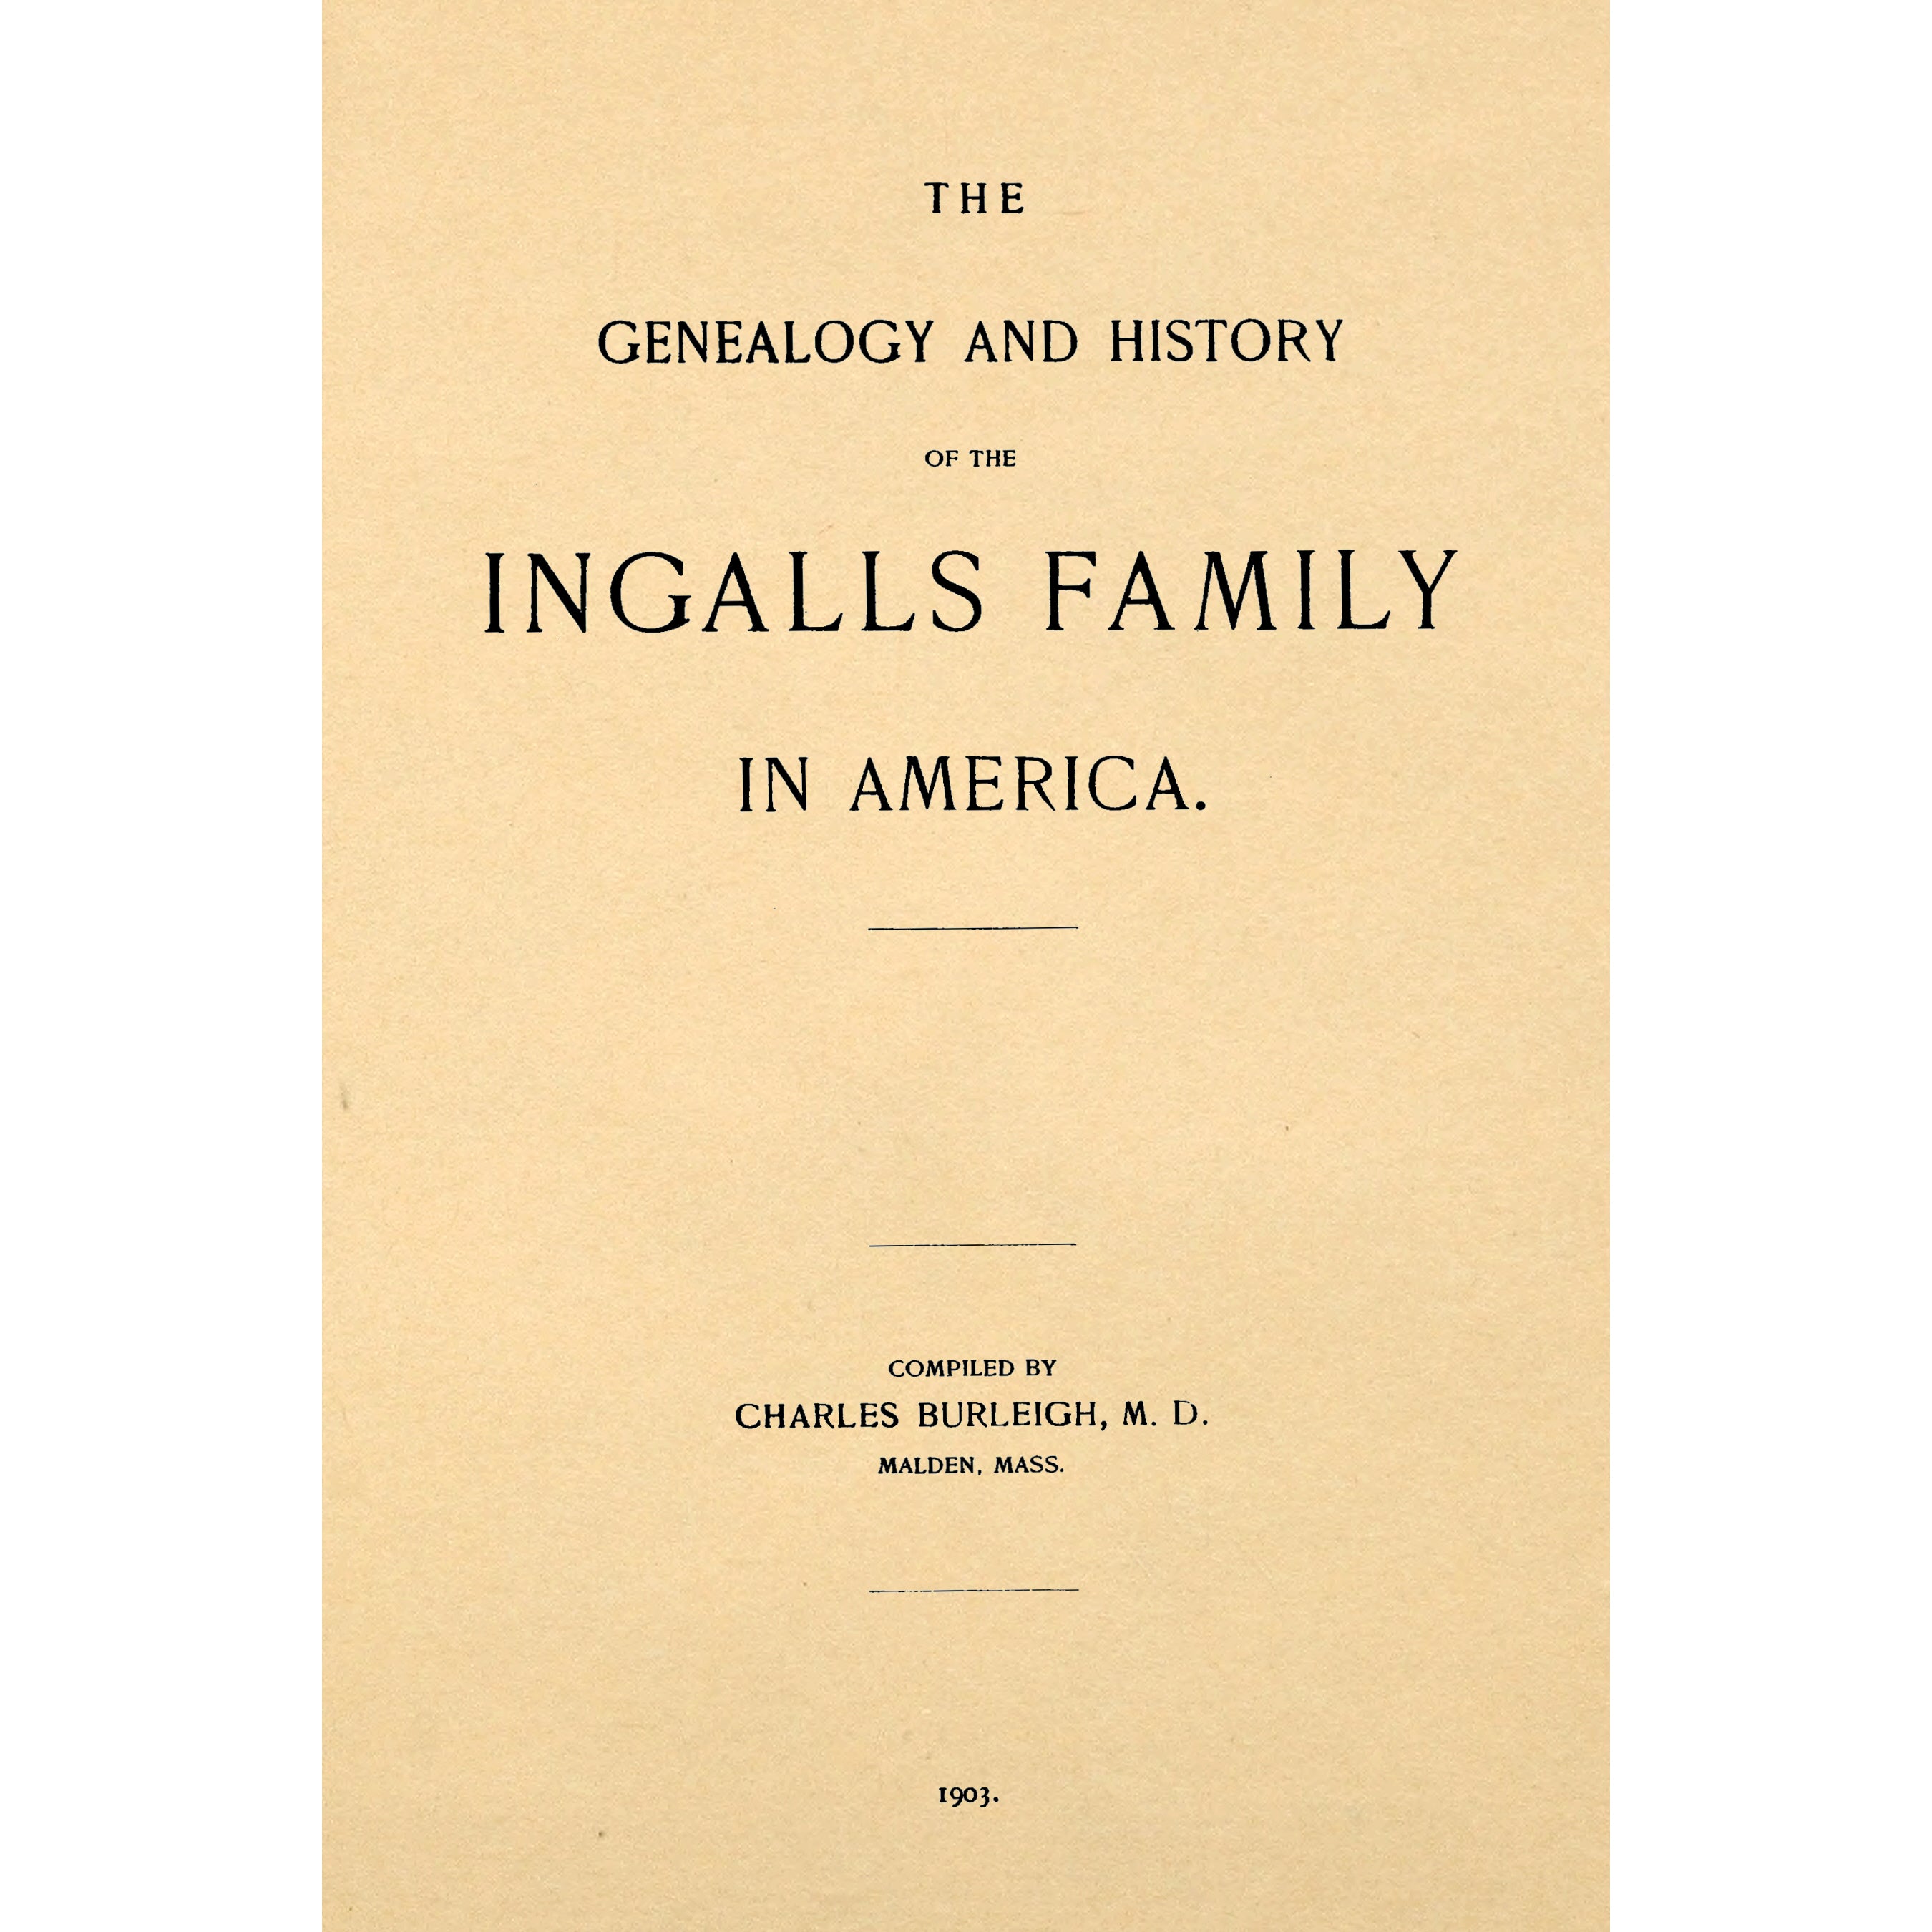 The genealogy and history of the Ingalls family in America